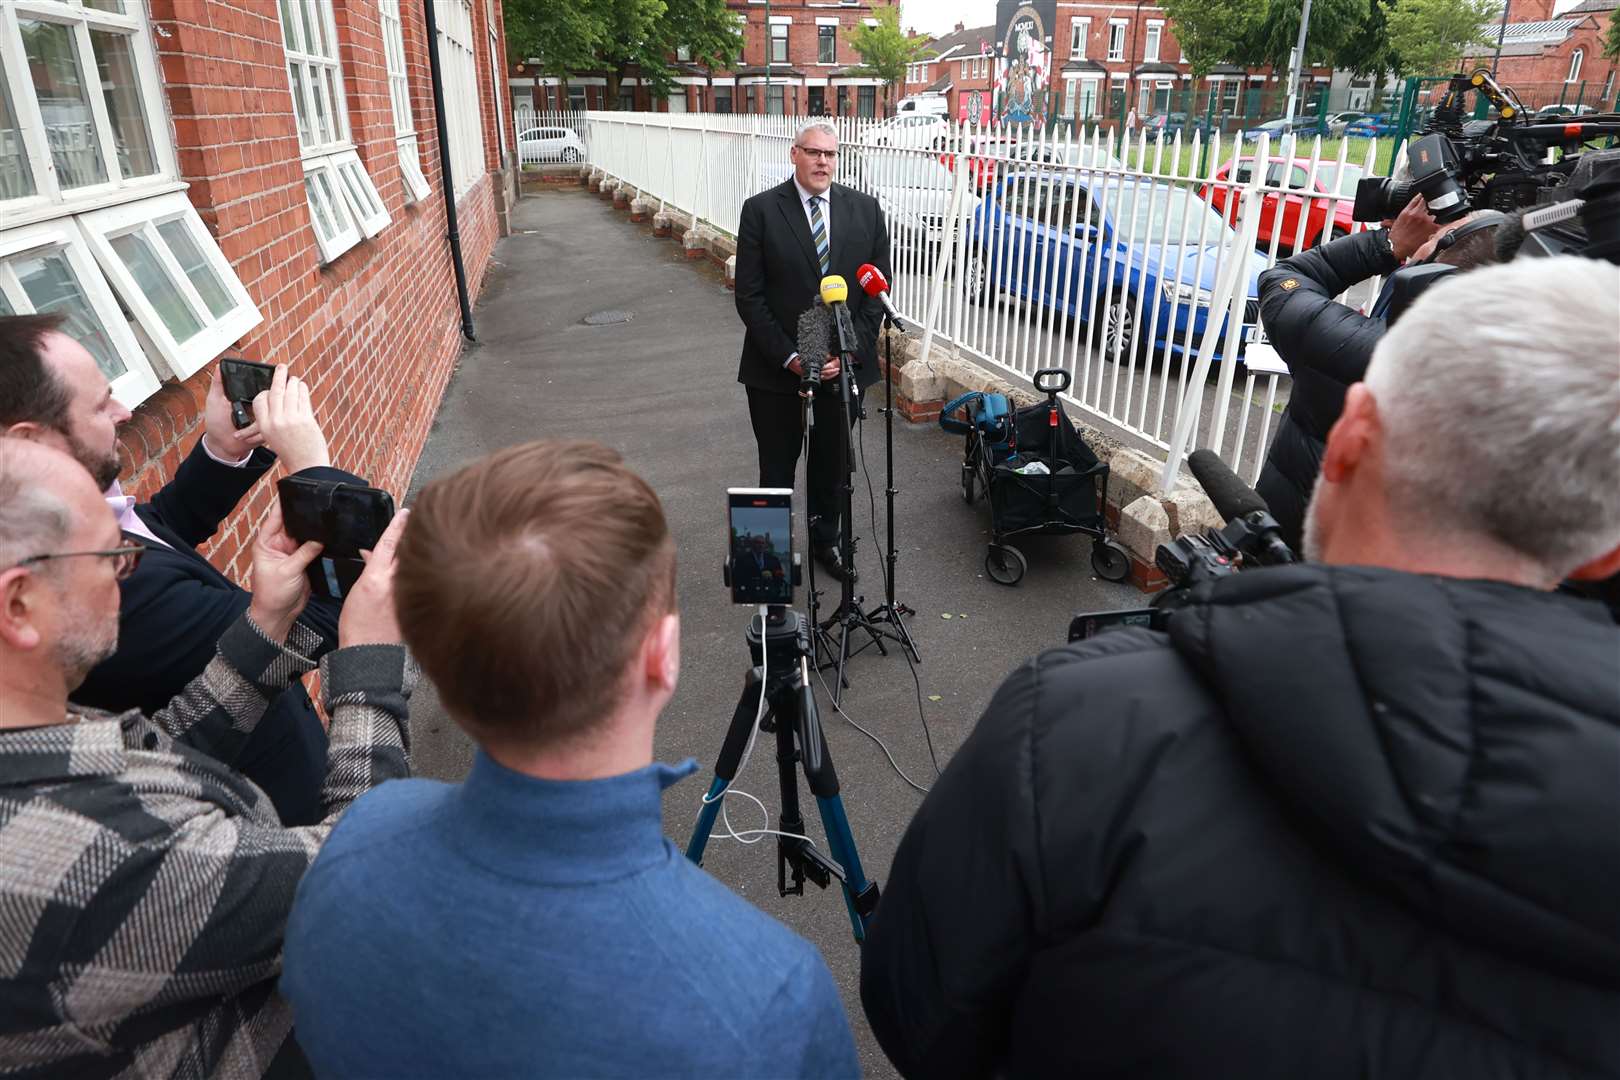 DUP interim leader Gavin Robinson speaks to the media during a press conference at a Sure Start centre in east Belfast (Liam McBurney/PA)